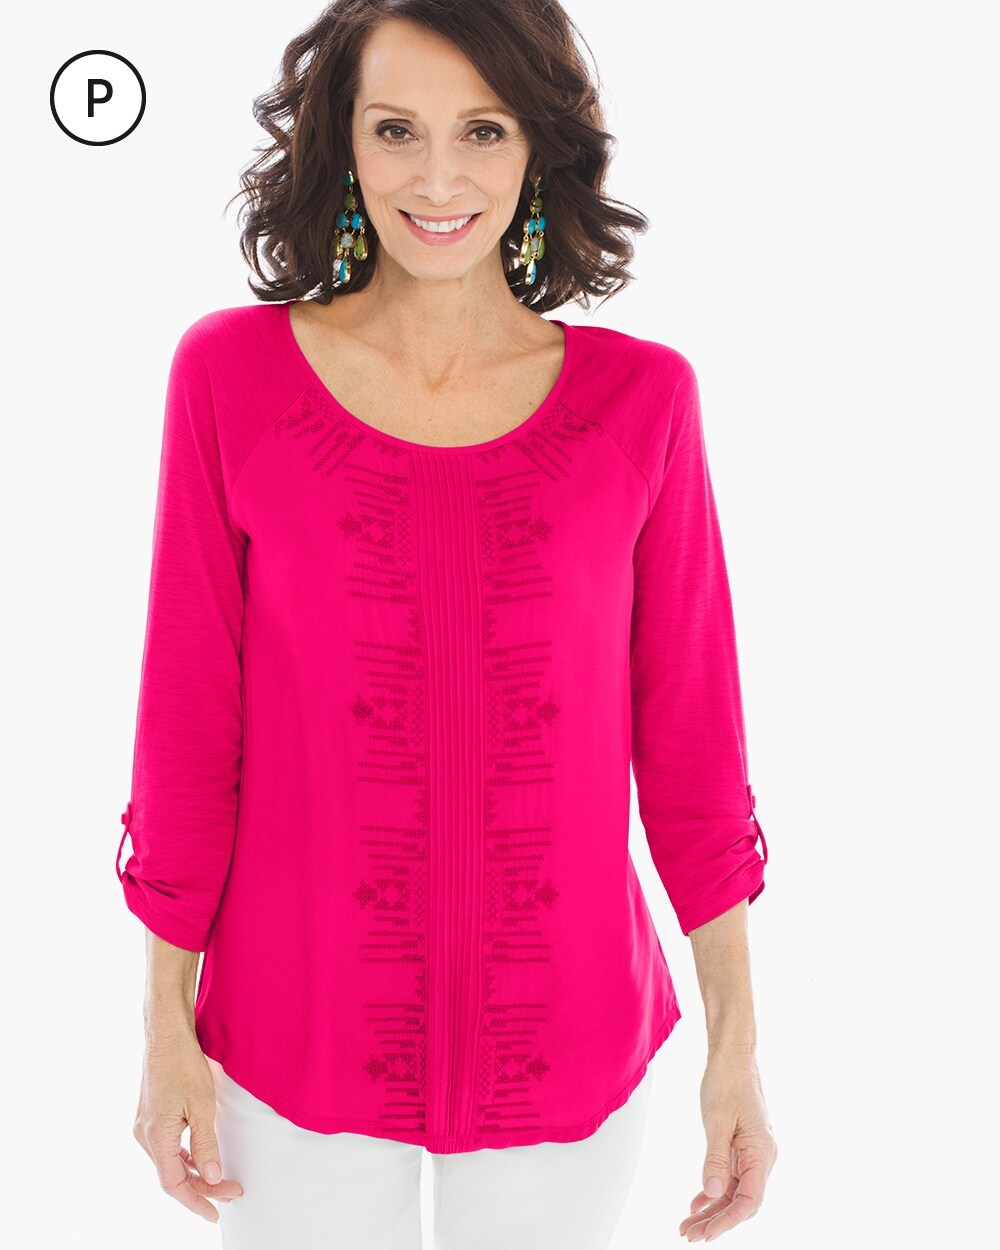 Petite Emmie Embroidered Top